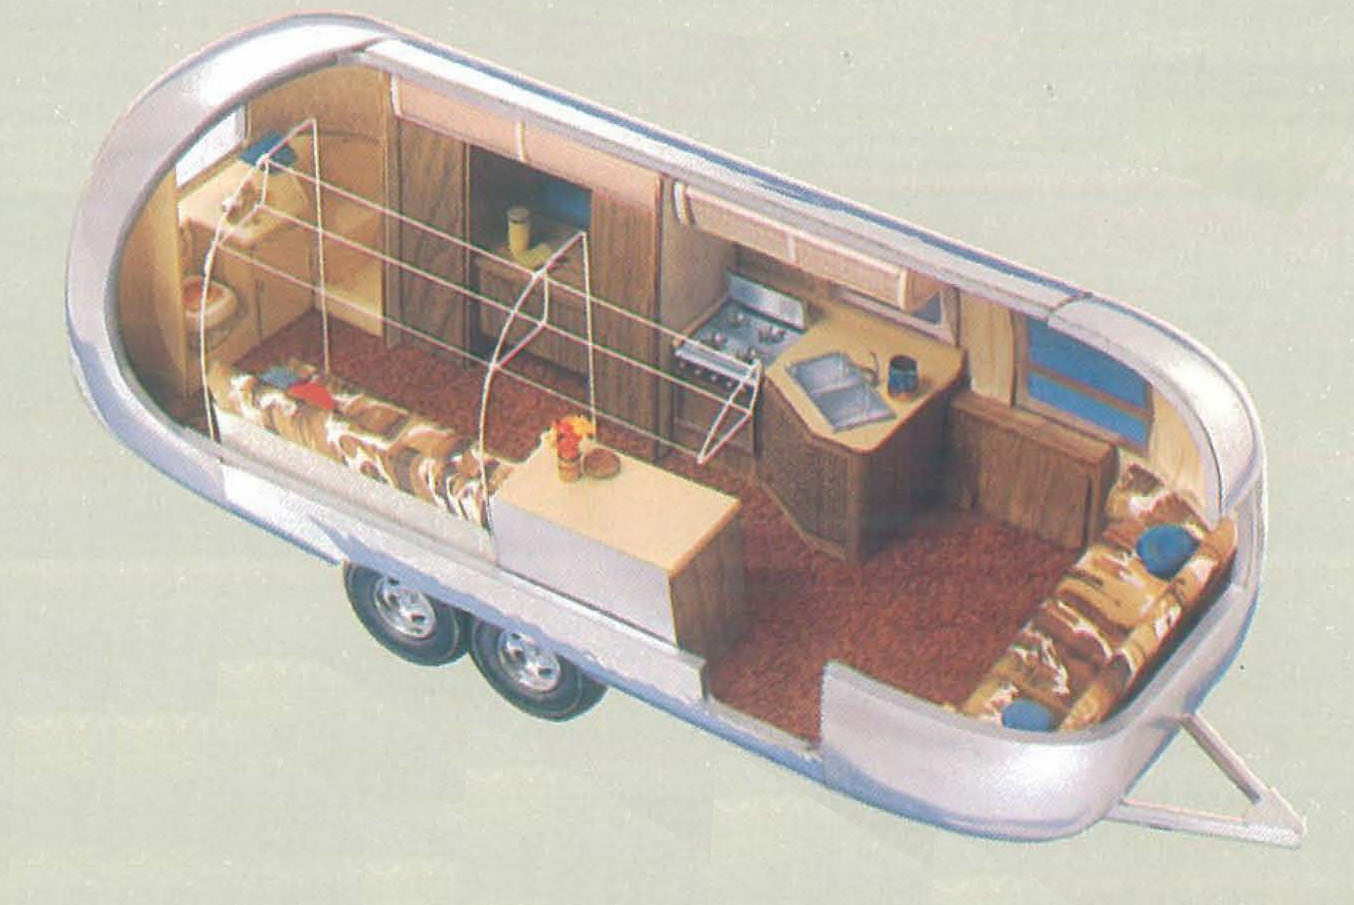 An Architect's Airstream: Plans